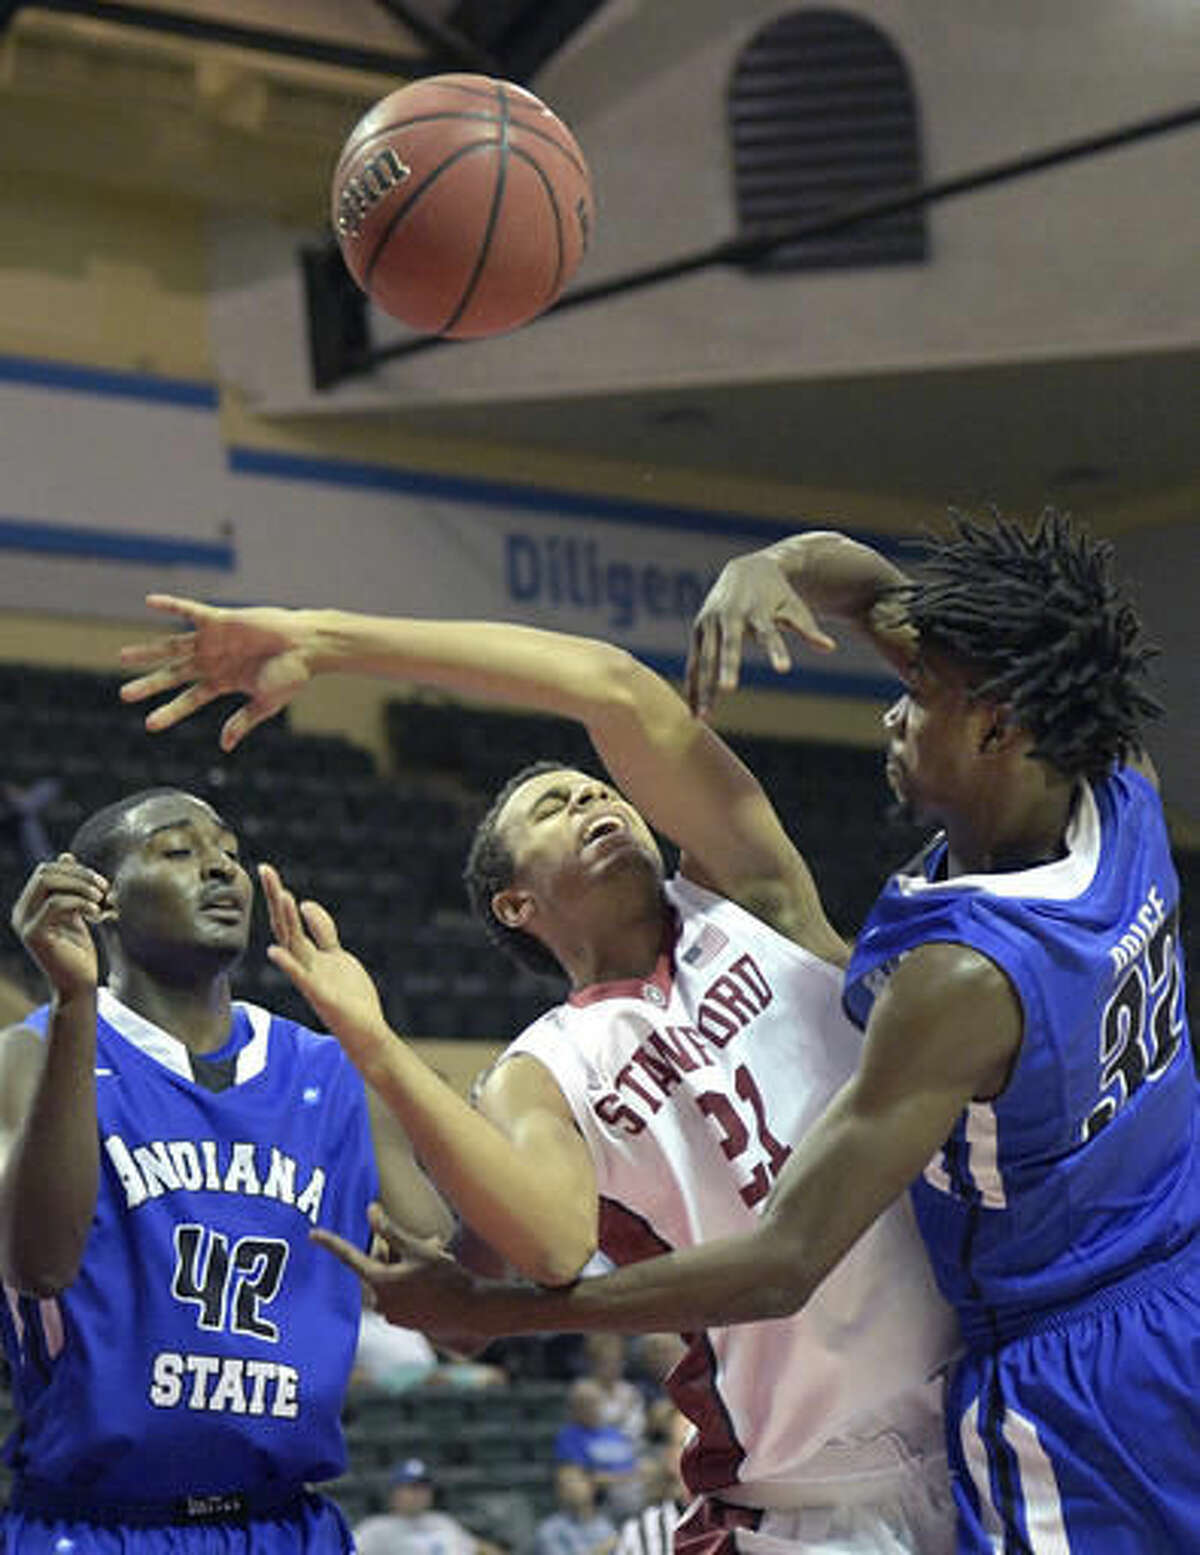 Stanford forward Cameron Walker (21) is fouled by Indiana State guard Laquarious Paige (32) while going up for a shot as center T.J. Bell (42) helps defend during the second half of an NCAA college basketball game at the AdvoCare Invitational tournament in Lake Buena Vista, Fla., Friday, Nov. 25, 2016. Stanford won 65-62. (AP Photo/Phelan M. Ebenhack)